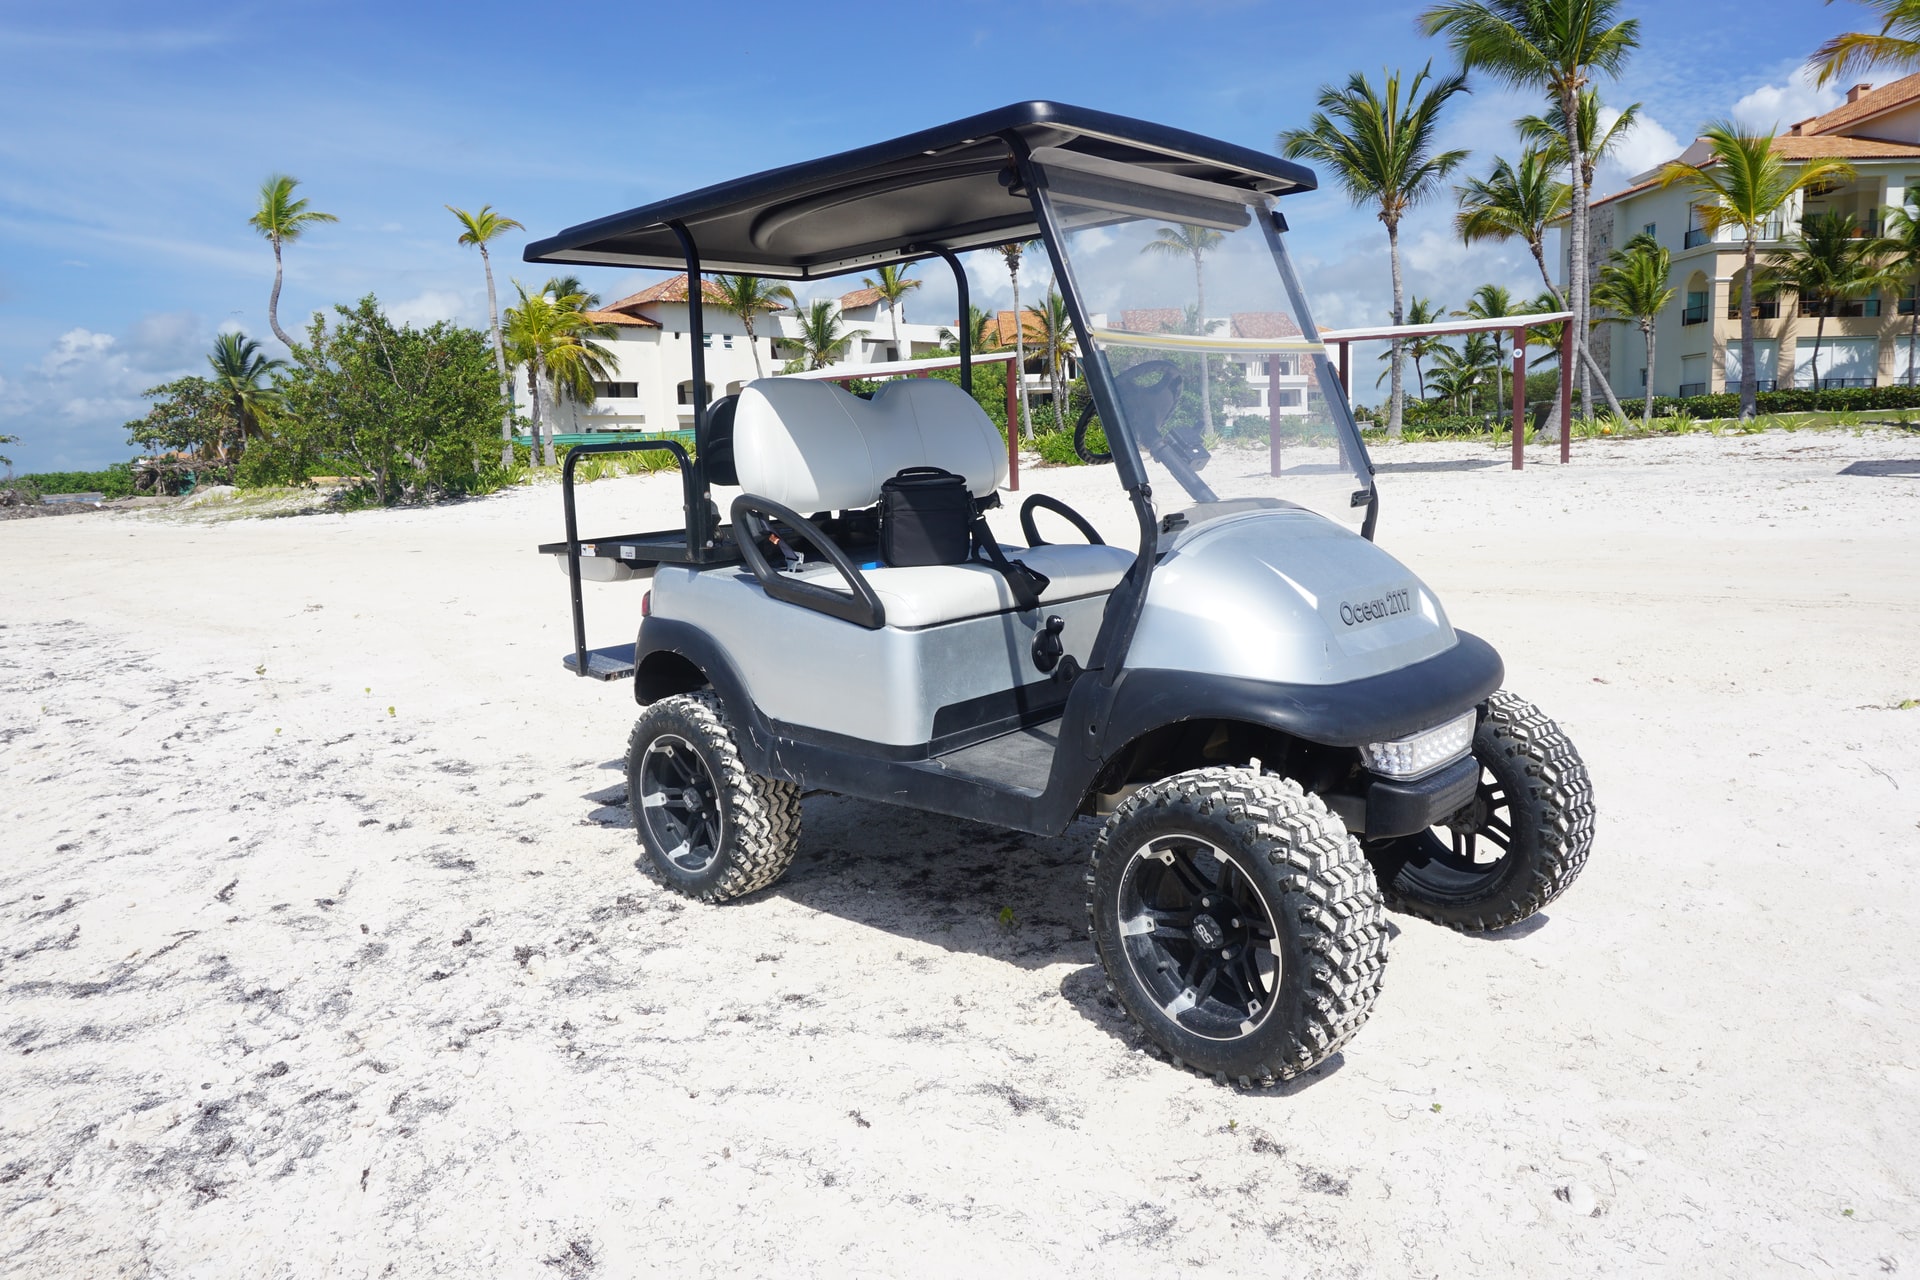 UTV vs. Golf Cart: Which One Is Right for You?